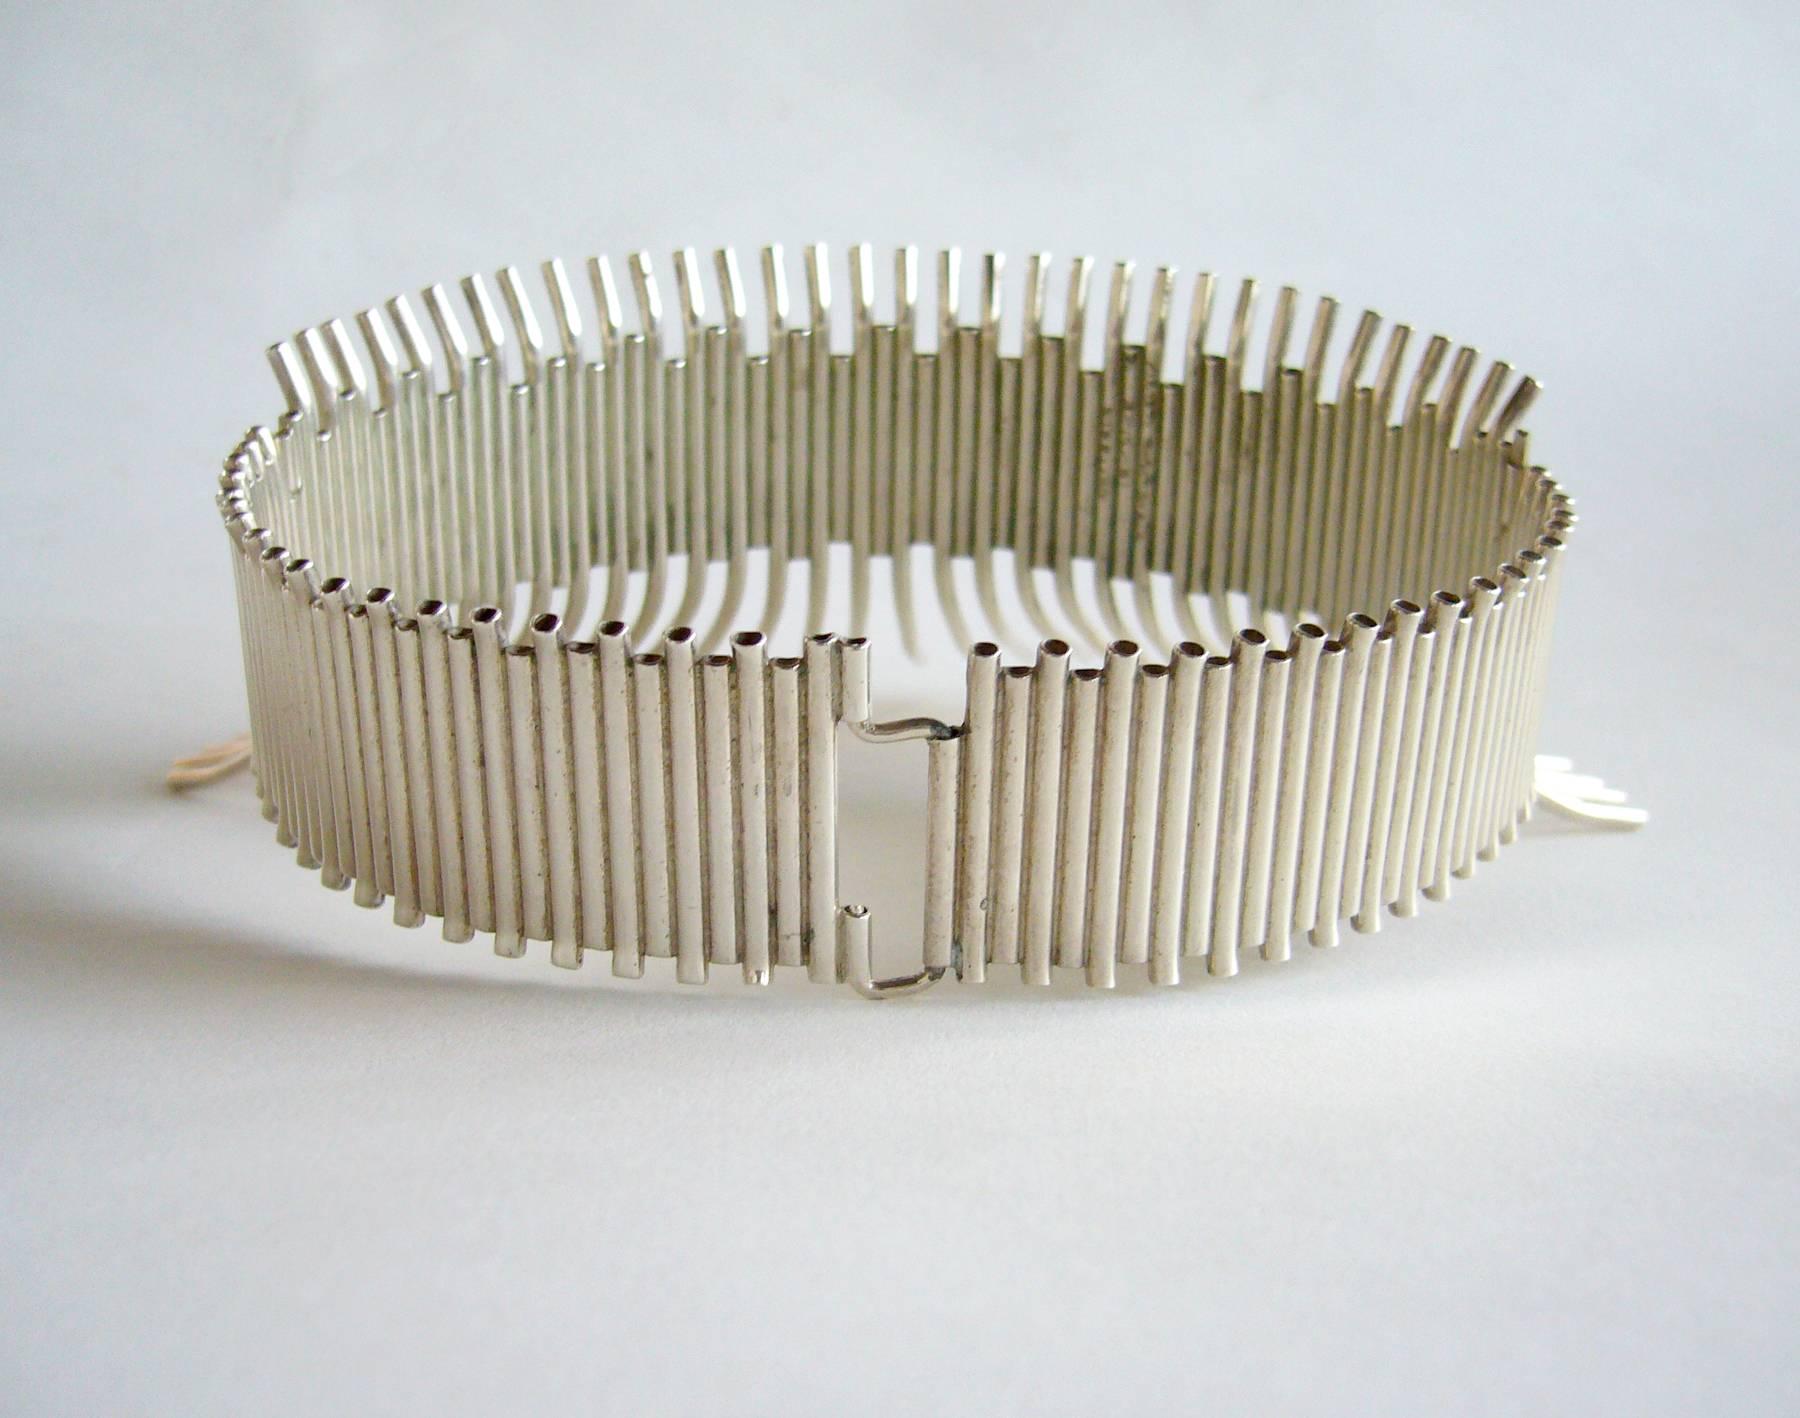 Sterling silver tube collar necklace created by Aaron Rubinstein of Cincinnati, Ohio.  Necklace has a wearable neck length of 15